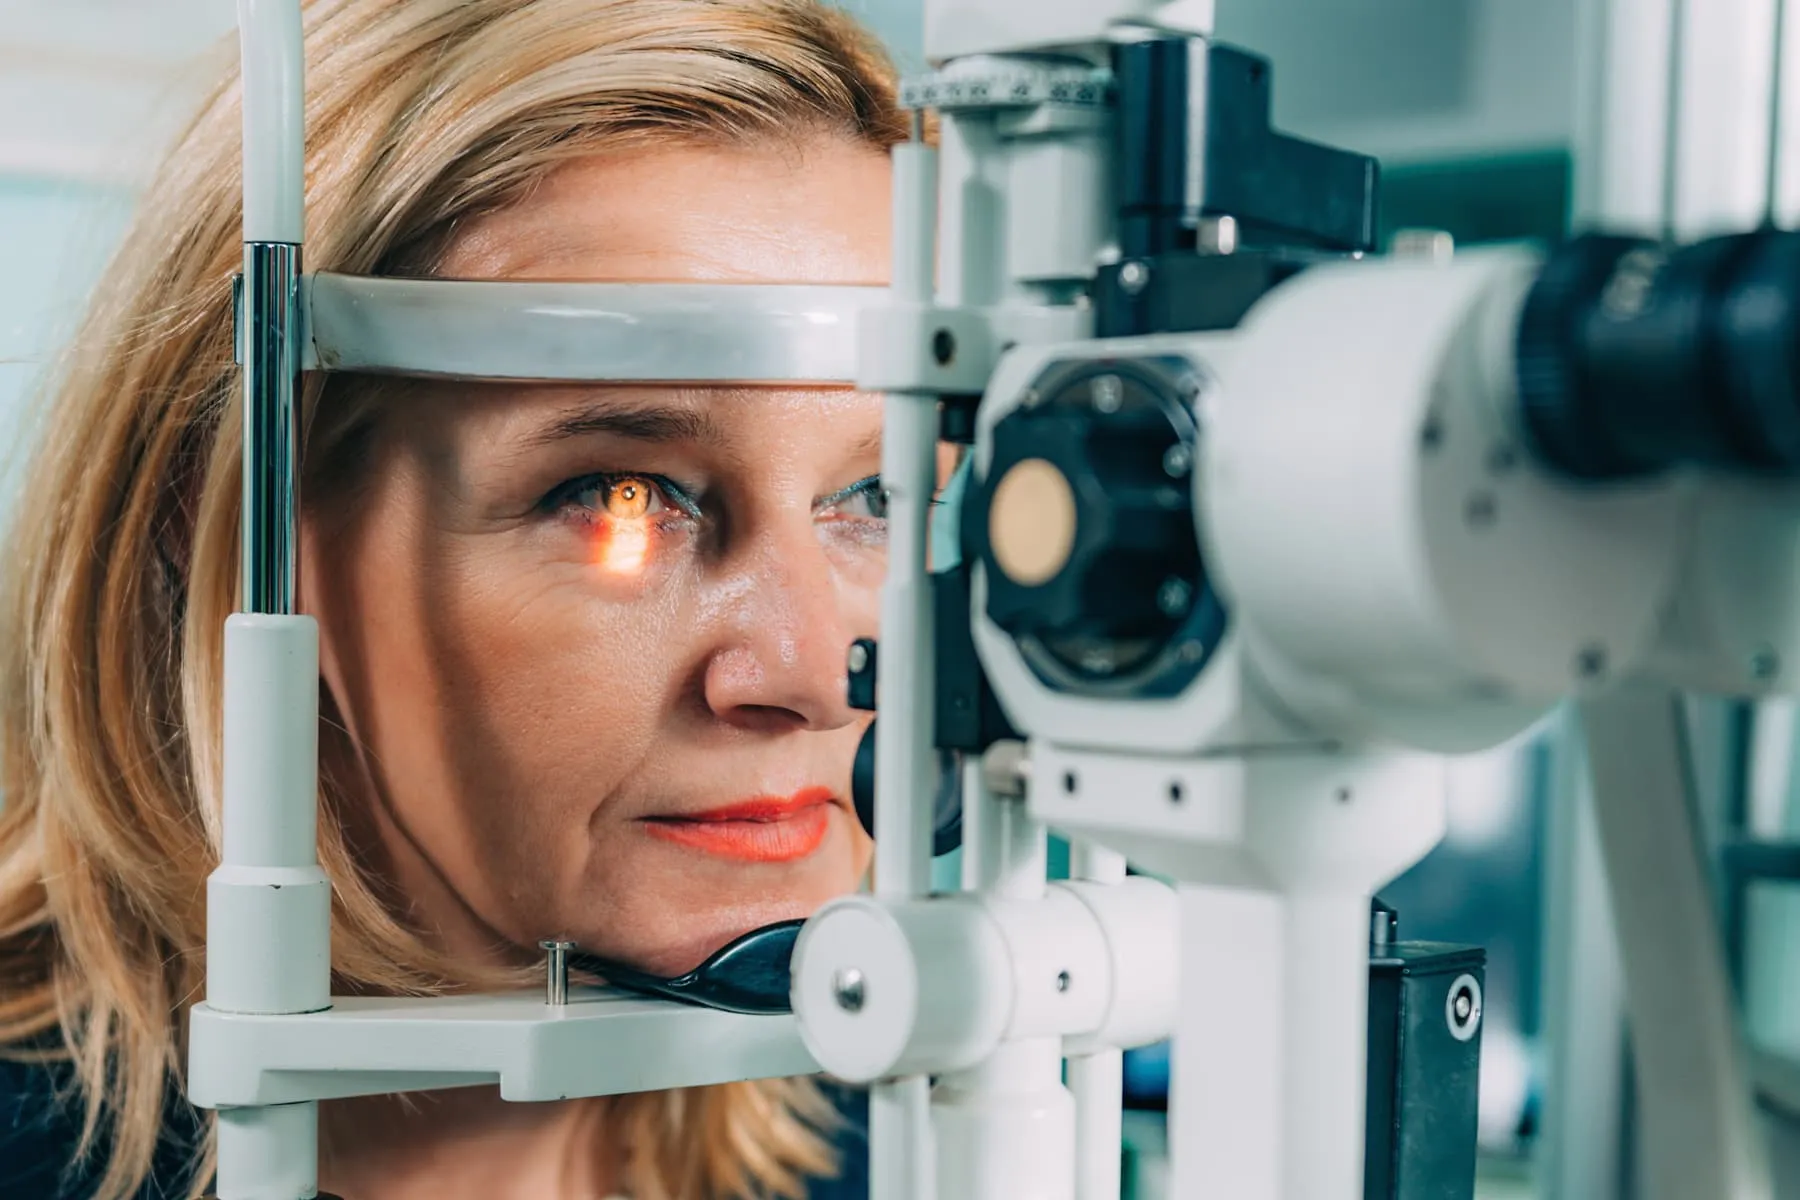 Age-Related Macular Degeneration: Putting a Hole in Our World